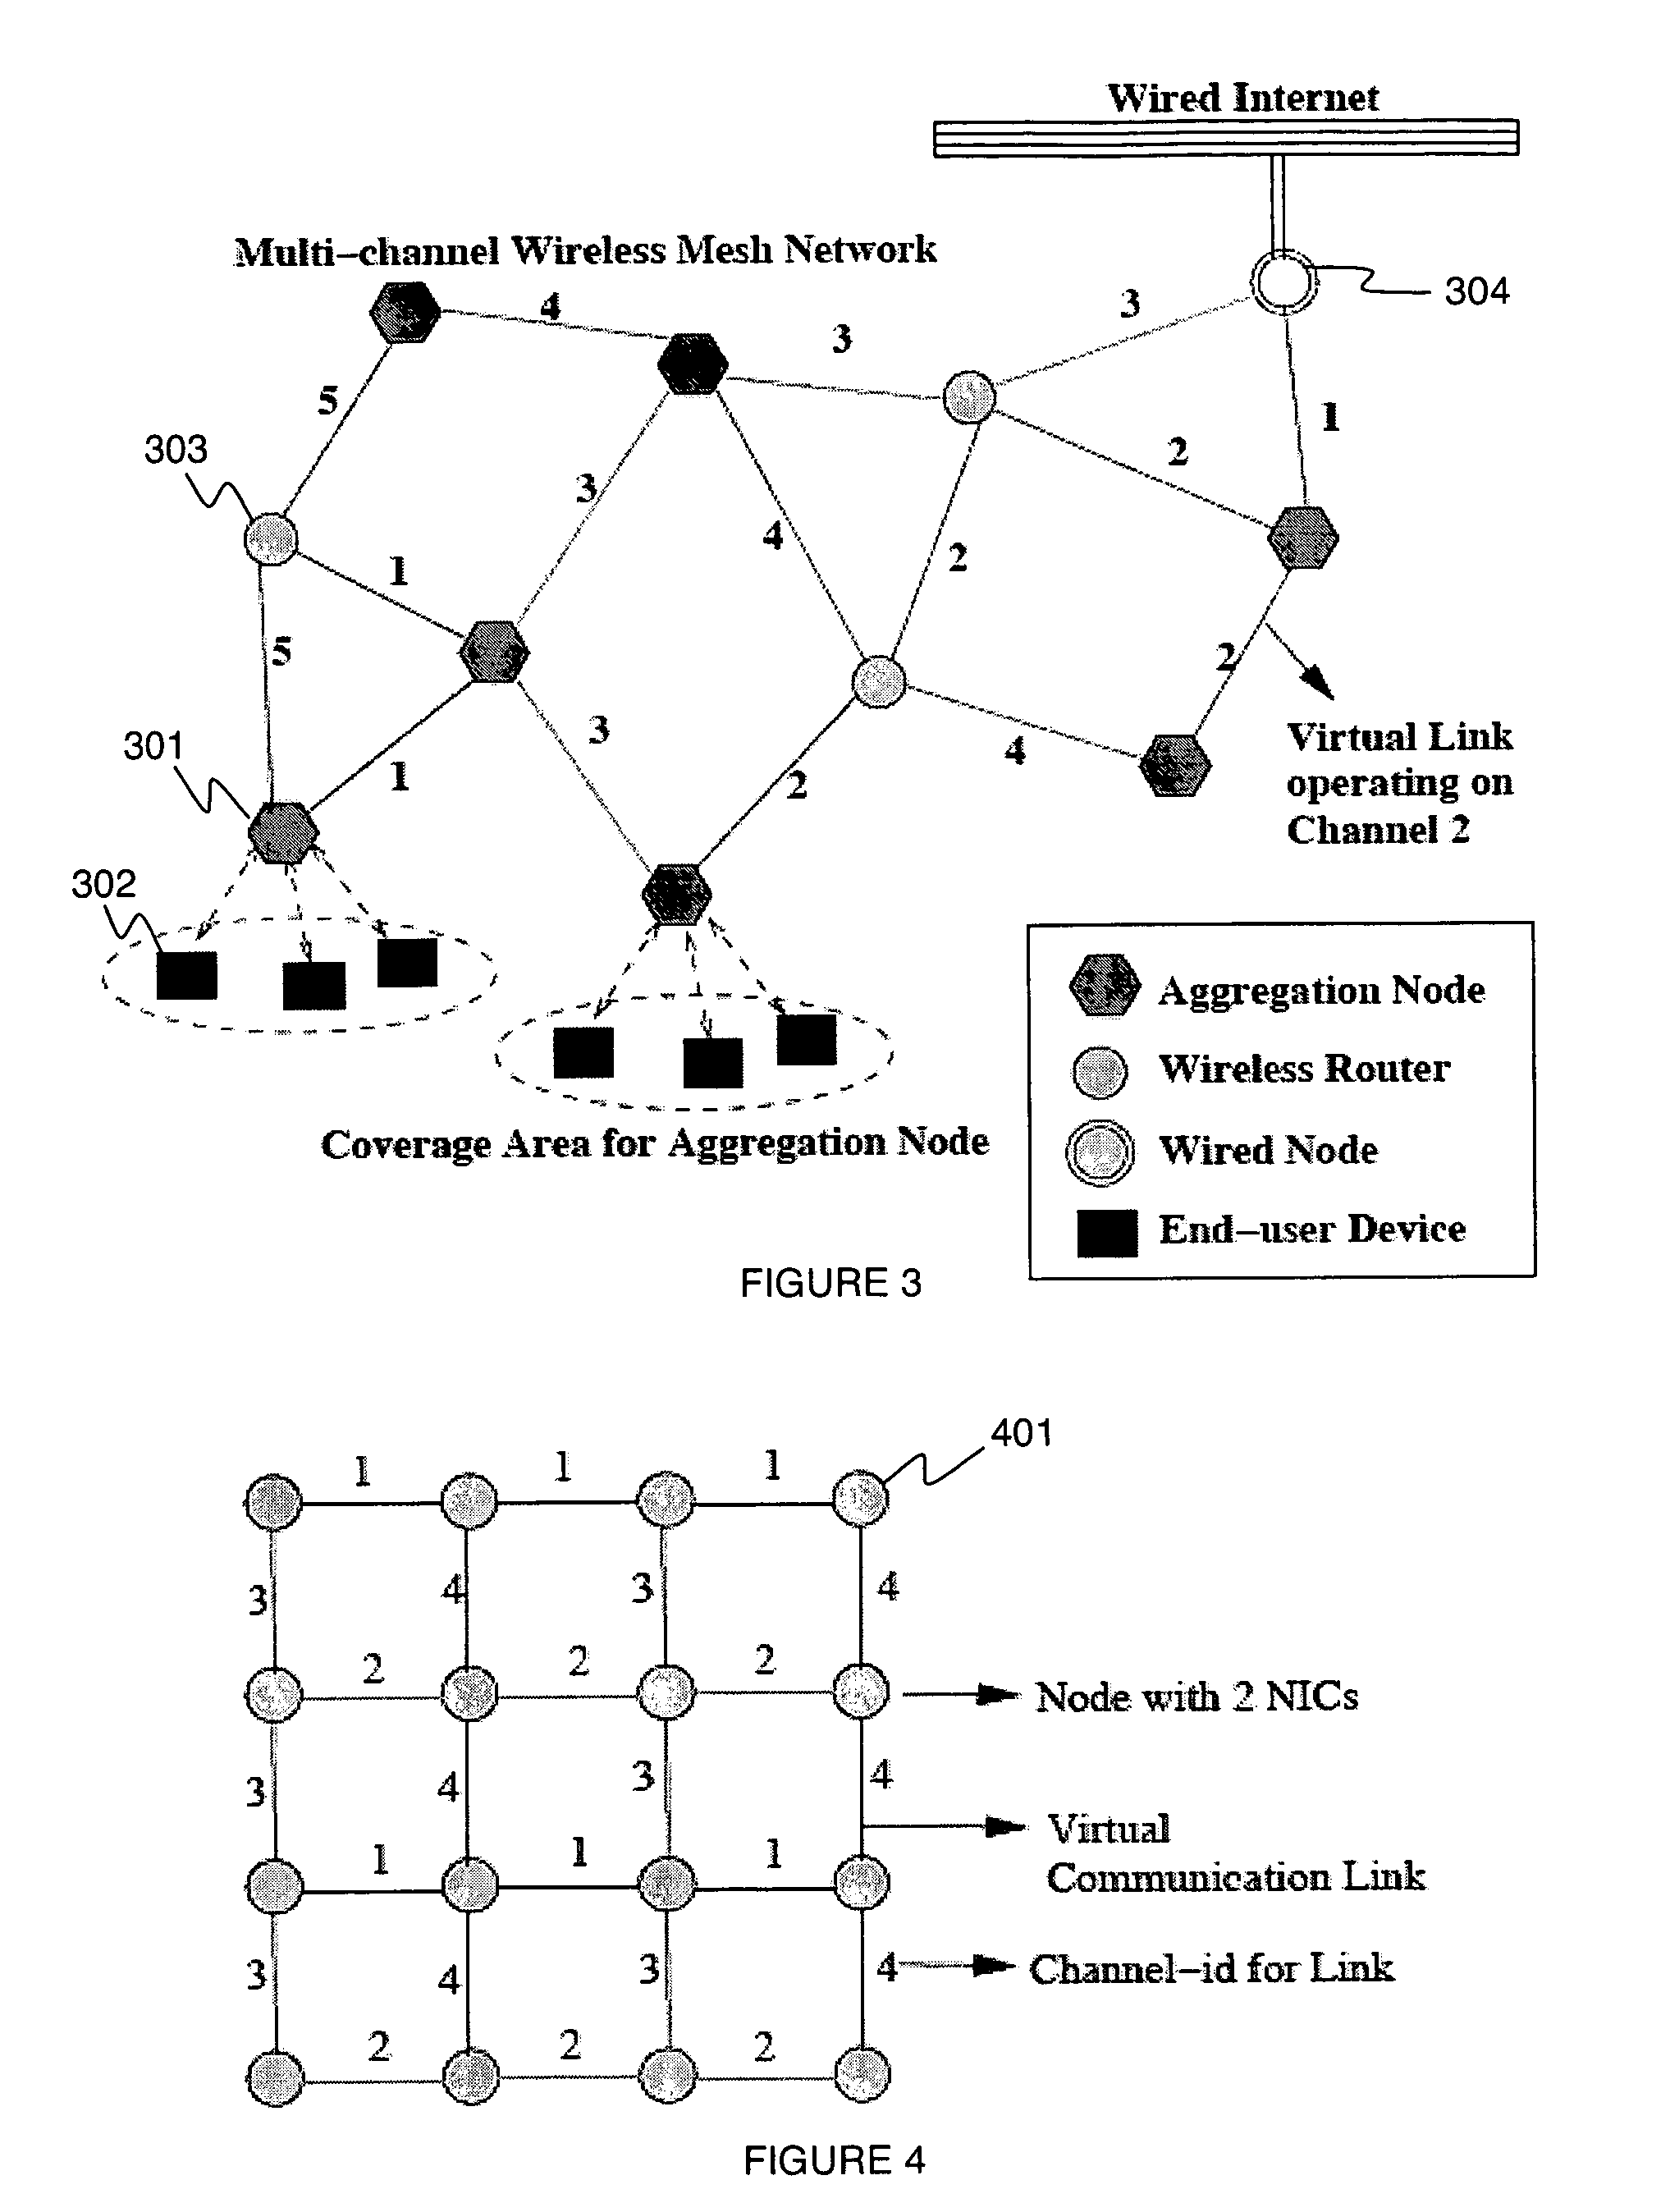 Centralized channel assignment and routing algorithms for multi-channel wireless mesh networks